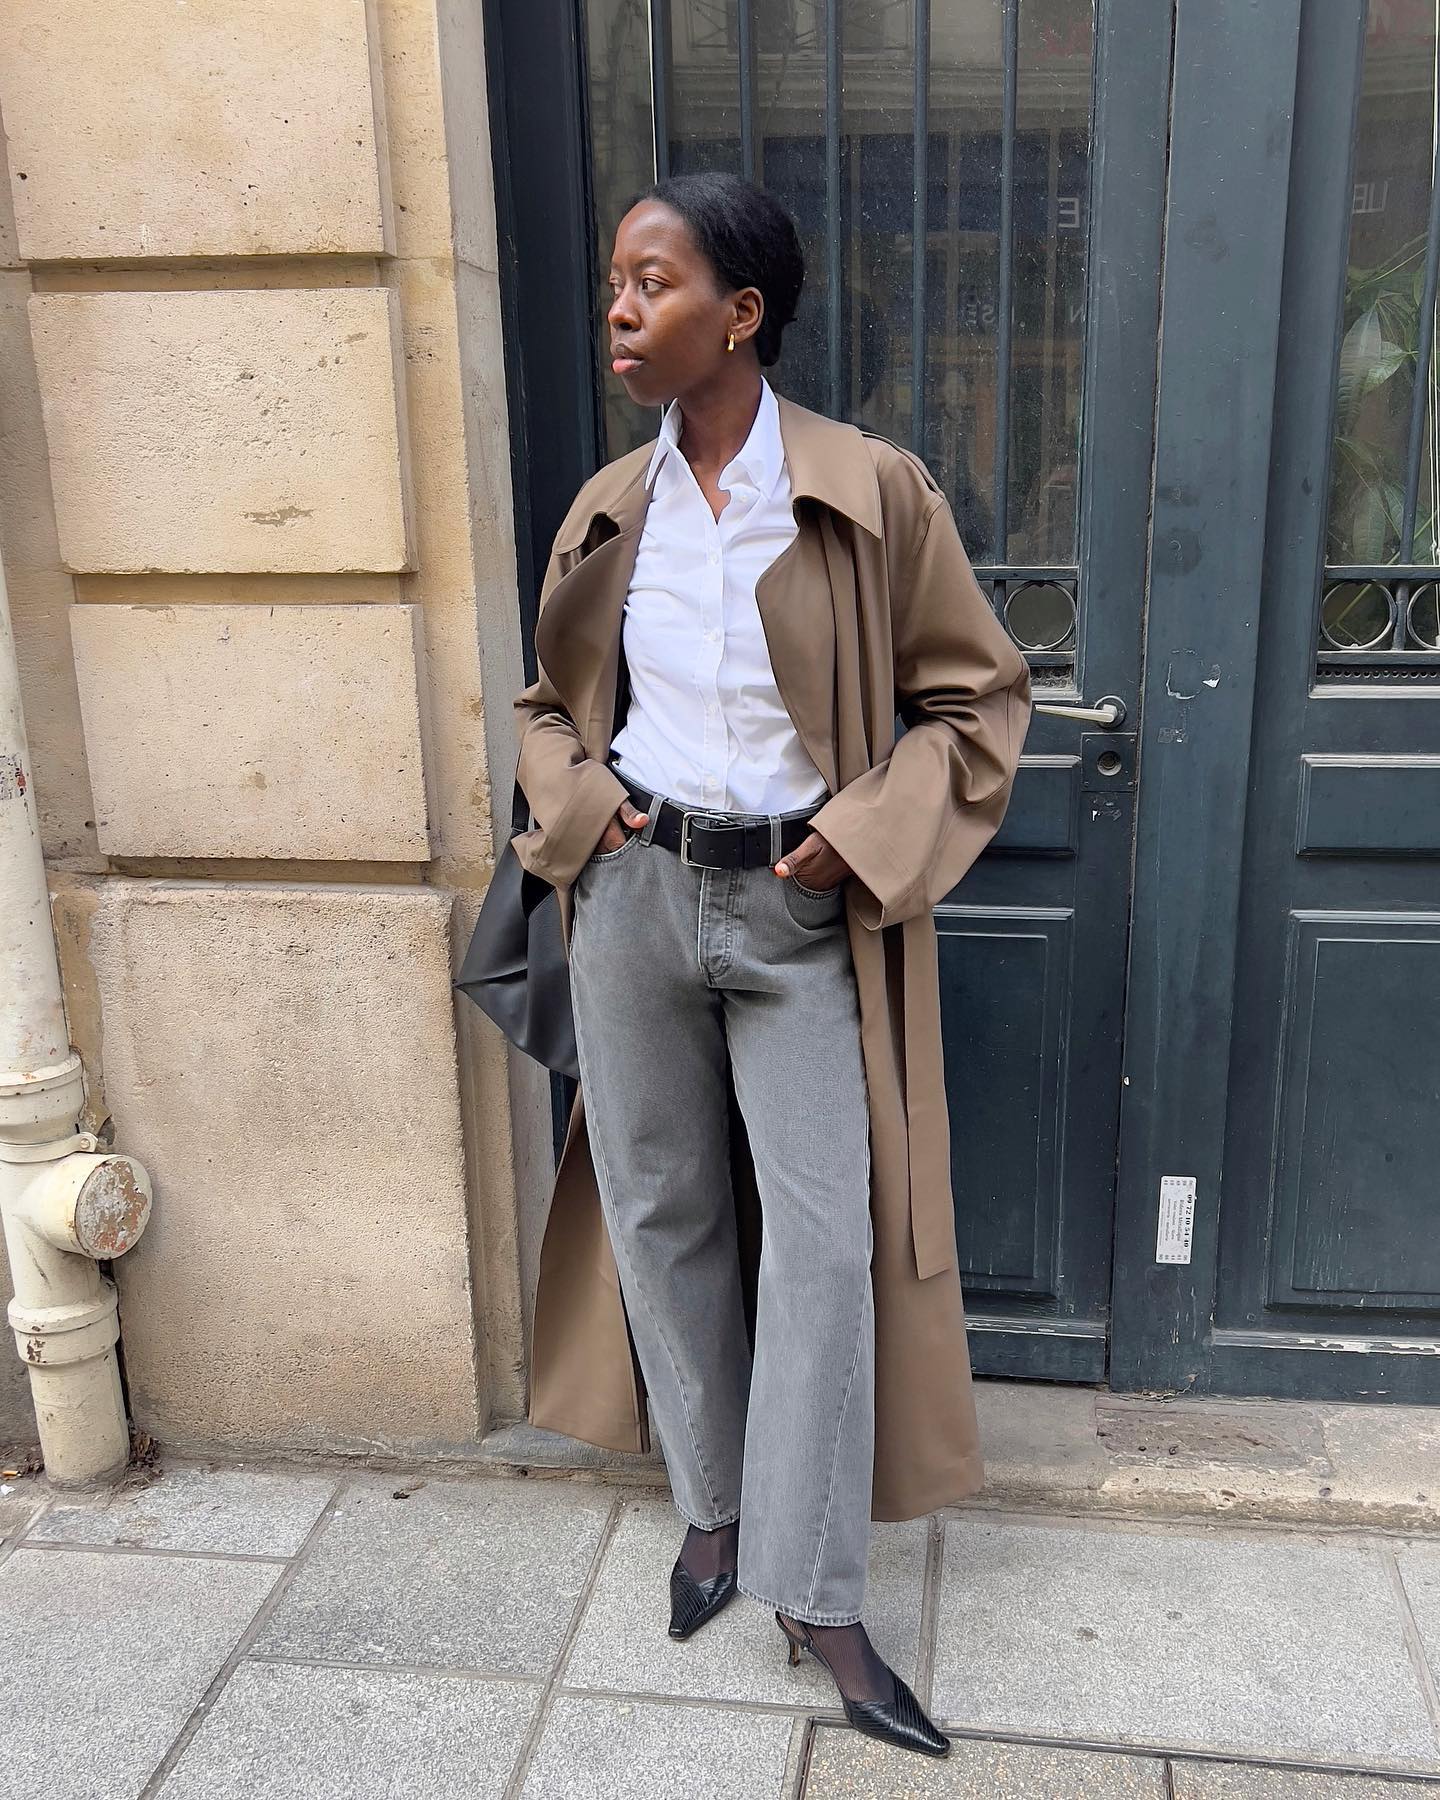 Sylvie Mus wearing grey jeans, a white shirt, and beige trench coat